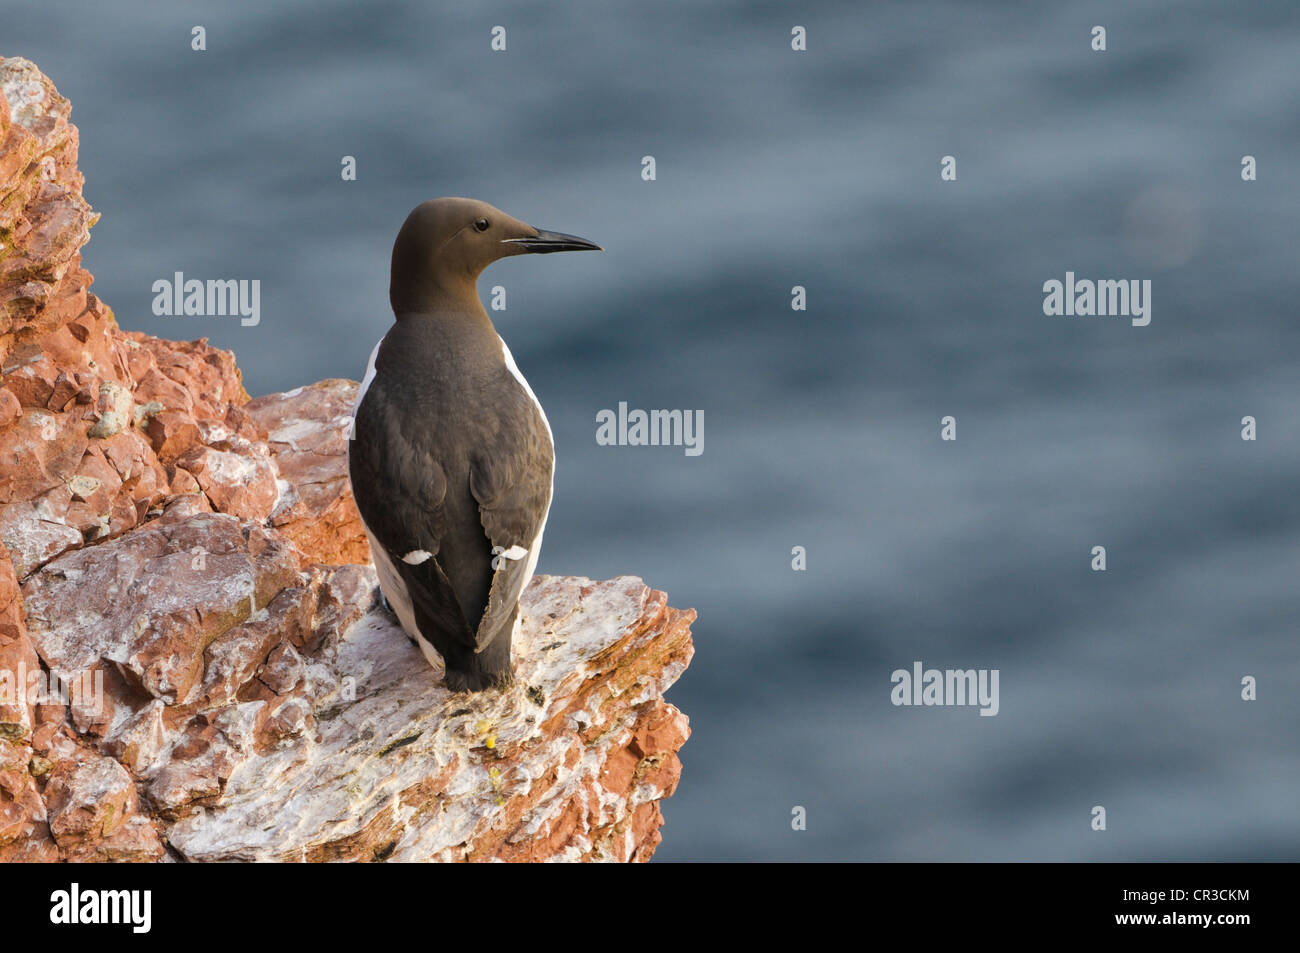 Common Murre or Common Guillemot (Uria aalge), Helgoland, Schleswig-Holstein, Germany, Europe Stock Photo